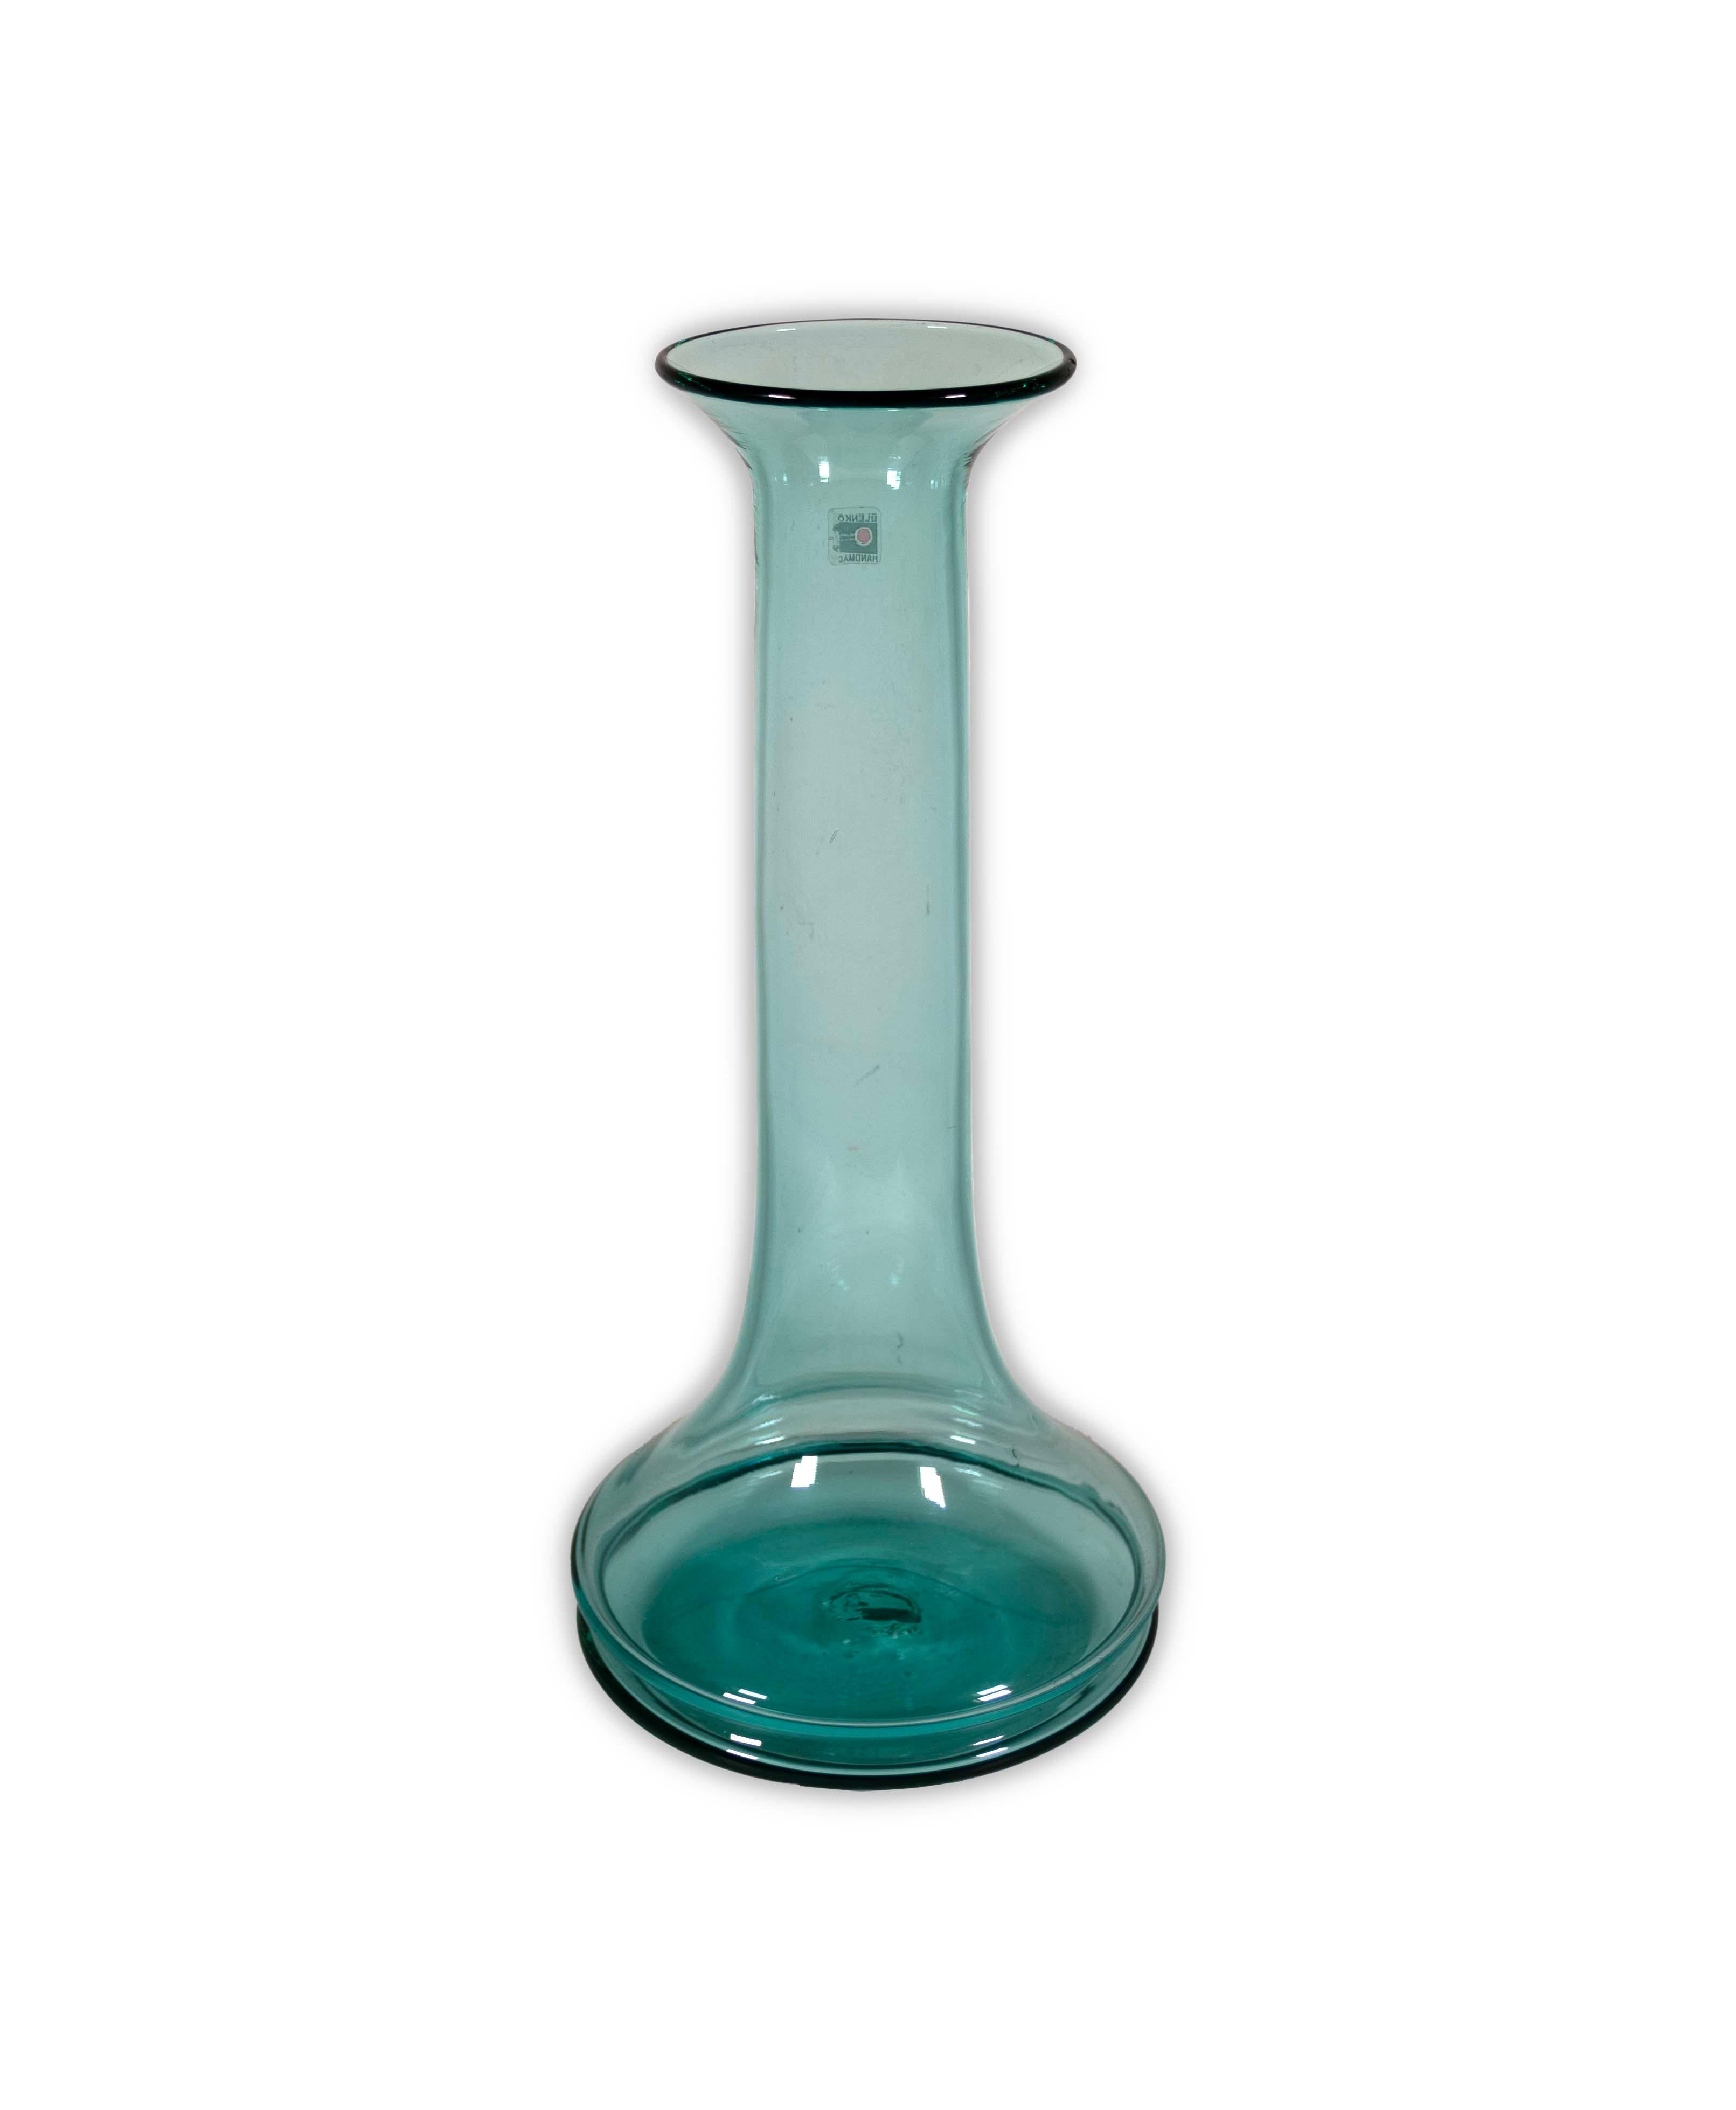  The Don Shepherd for Blenko Turquoise Floor Glass Vase, Model 789M, is a remarkable piece of mid-century modern glass artistry. Crafted by the renowned Blenko Glass Company in collaboration with Don Shepherd, this vase features a captivating,